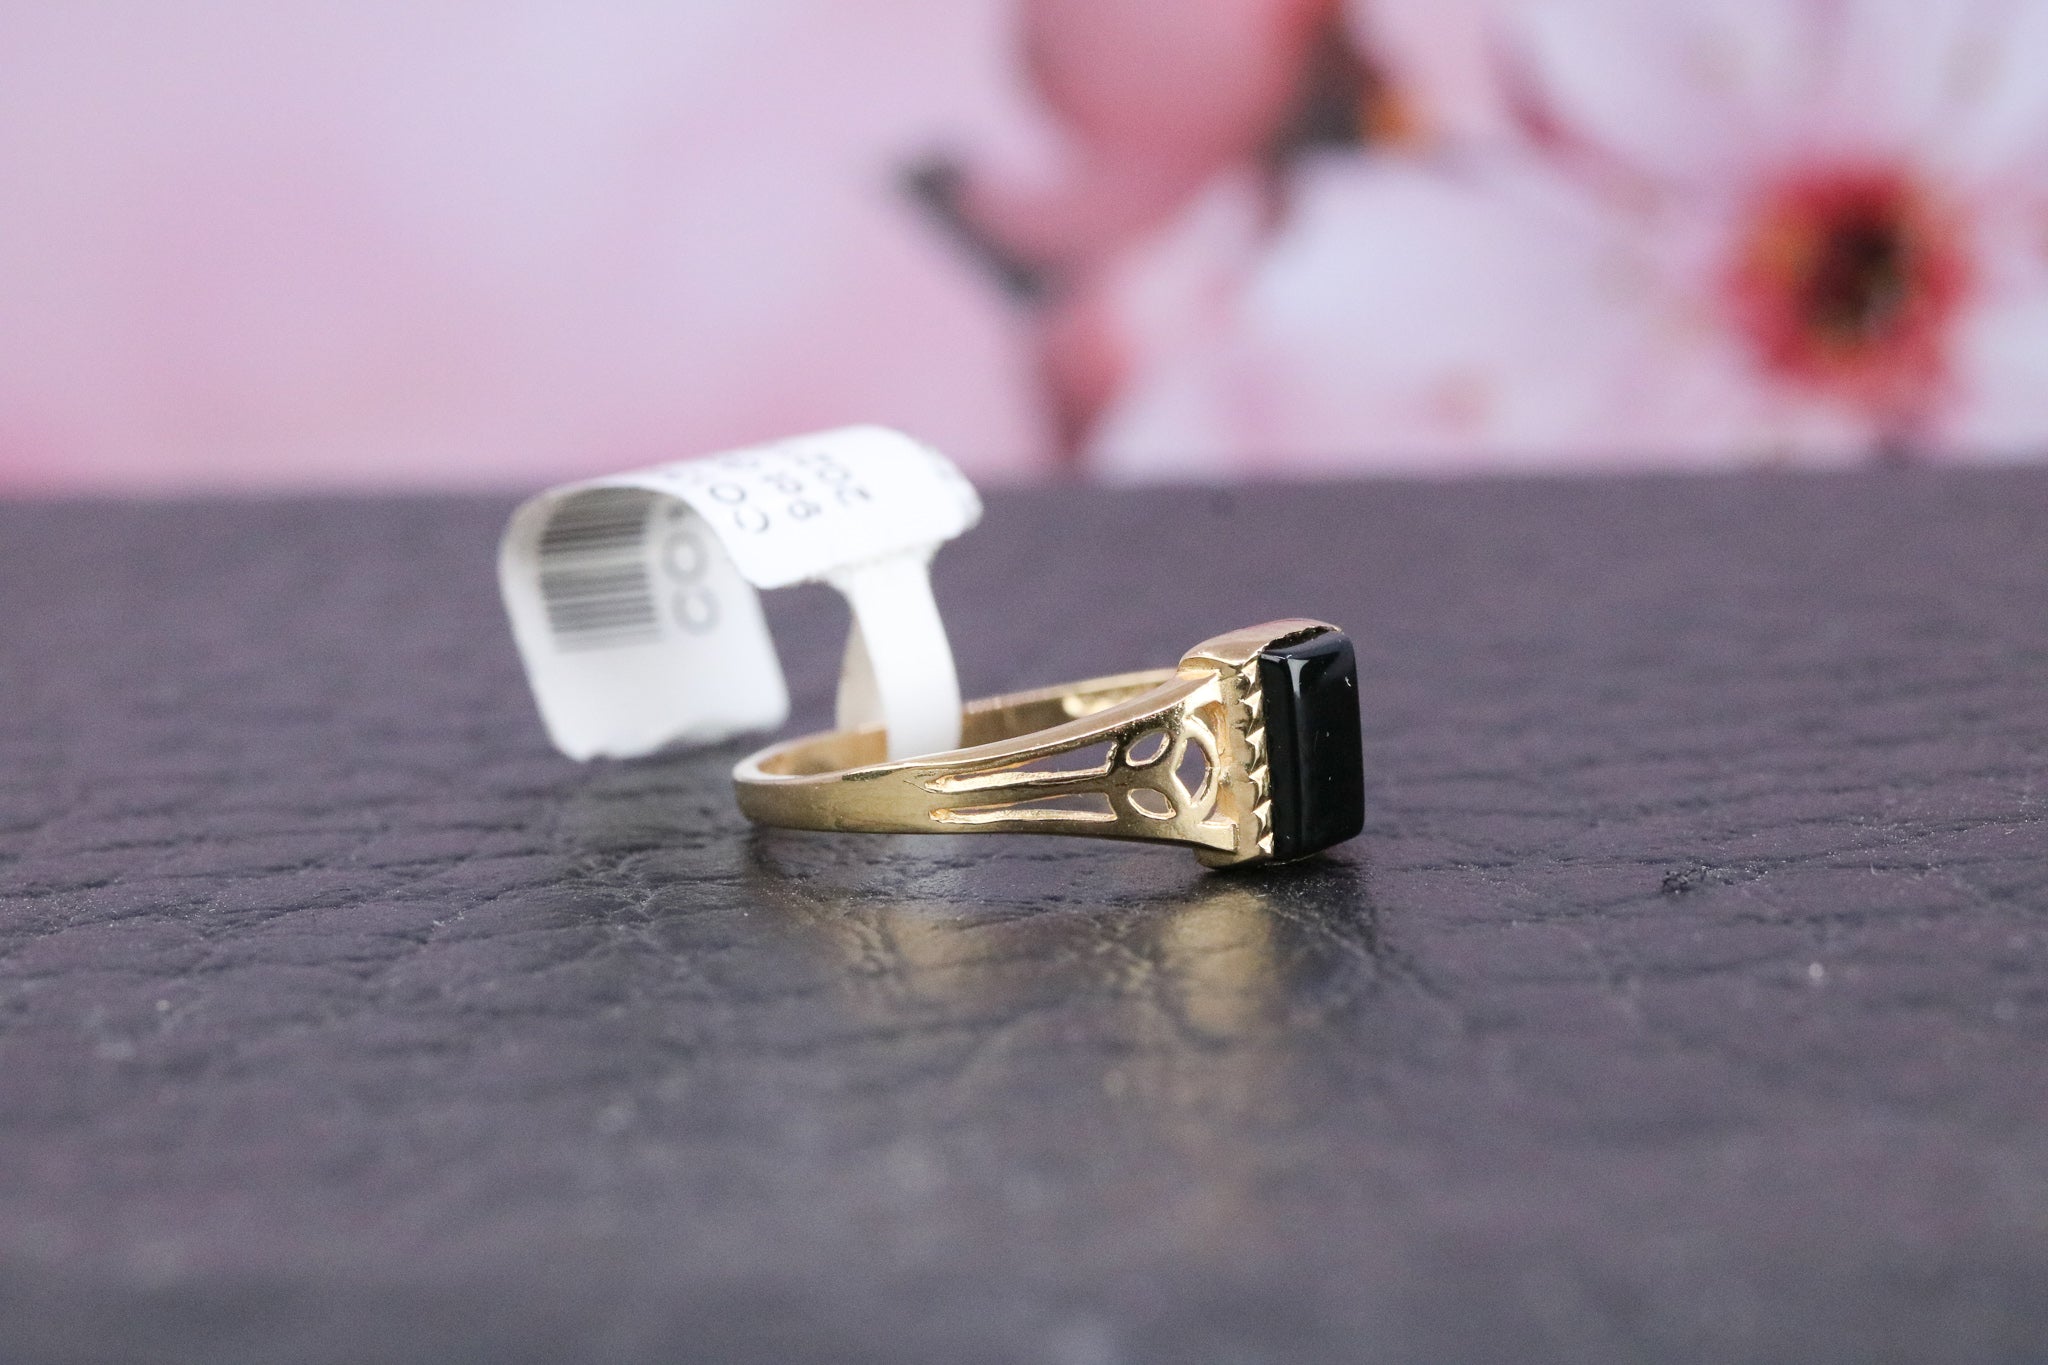 9ct Gold Onyx Ring - CO1346 - Hallmark Jewellers Formby & The Jewellers Bench Widnes